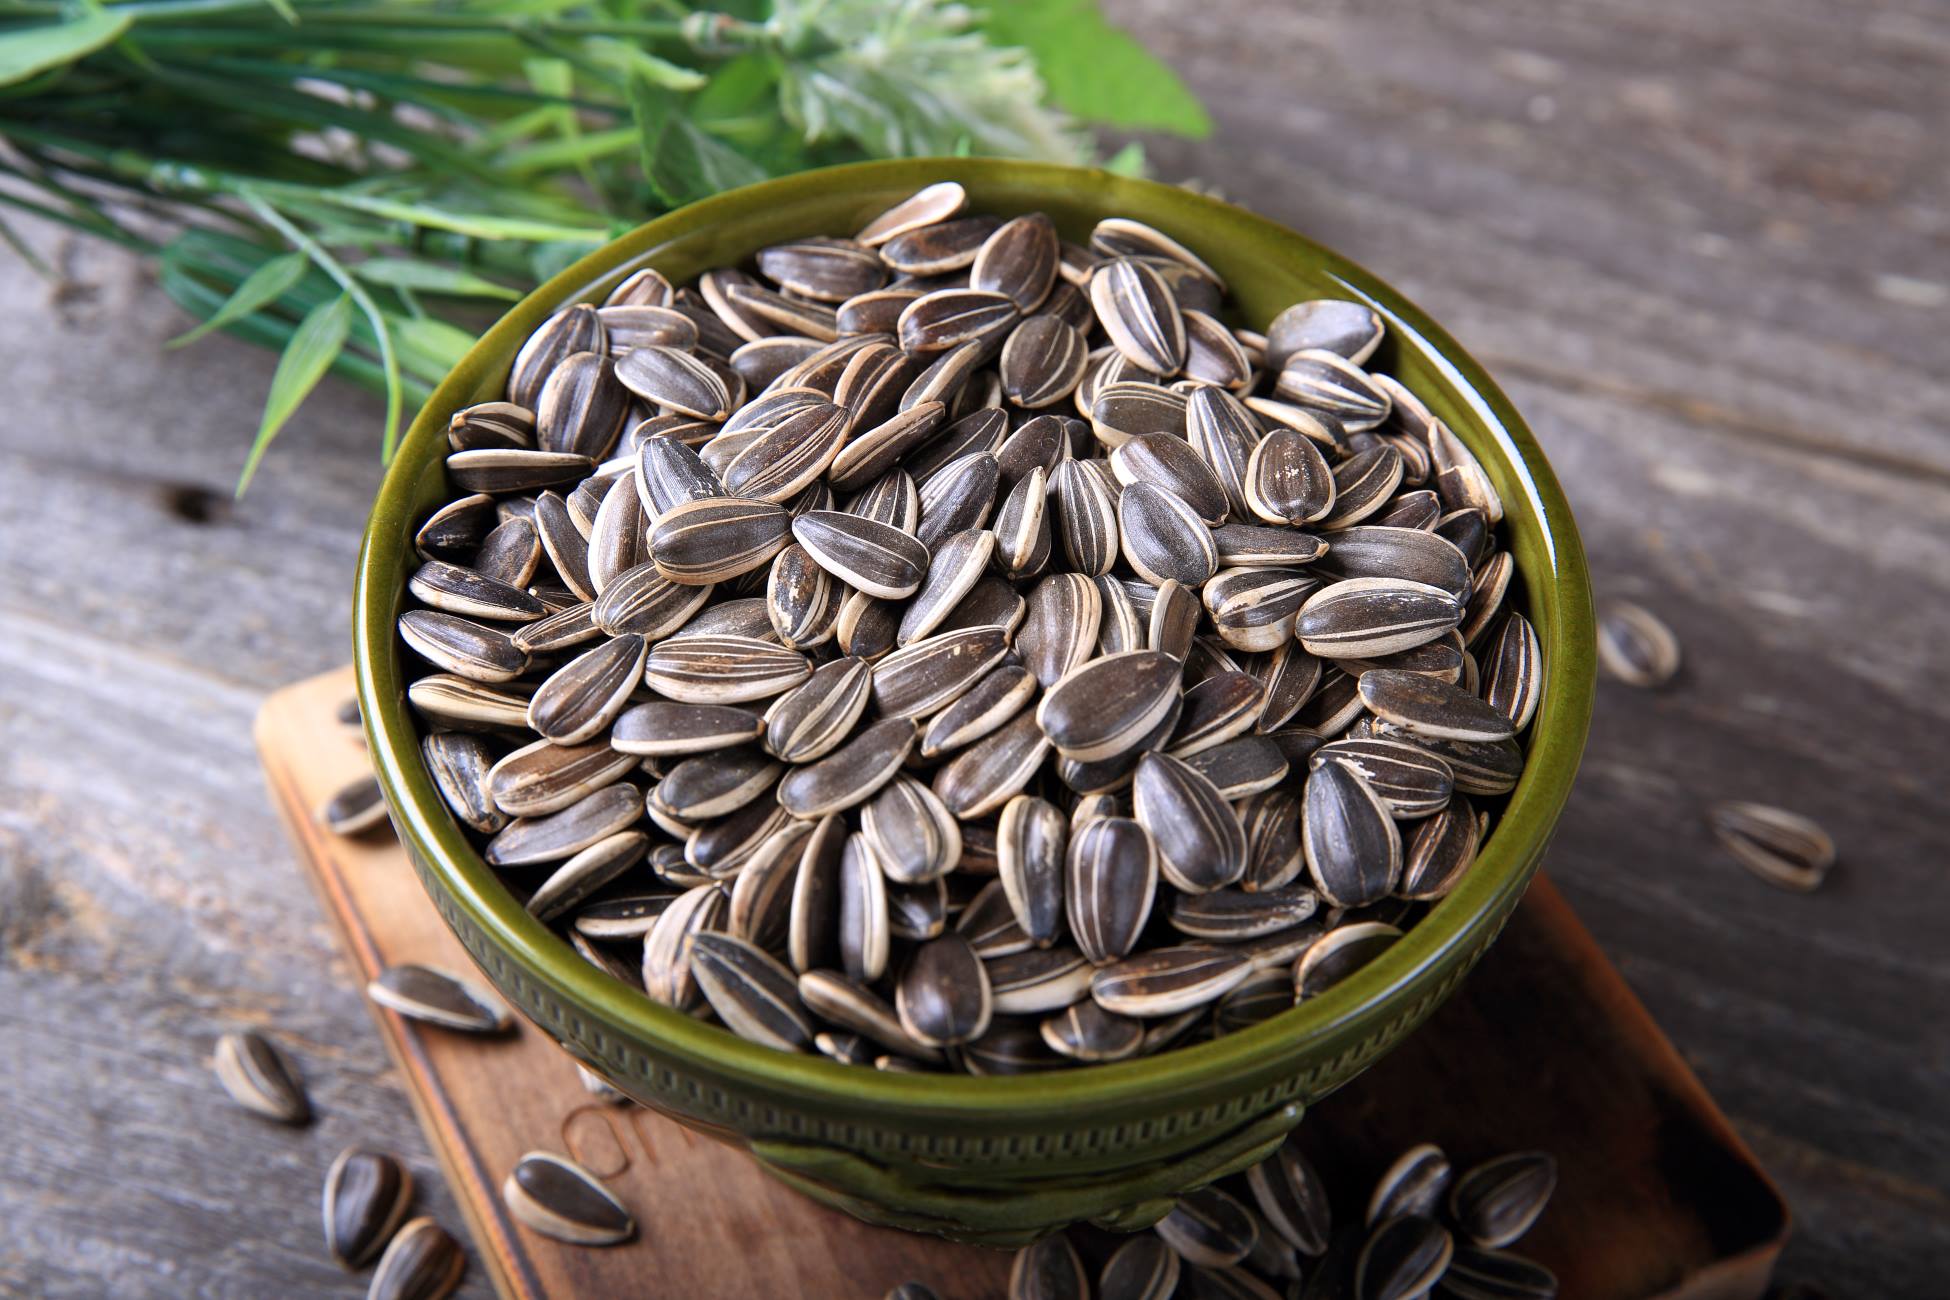 How Are Sunflower Seeds Good For You